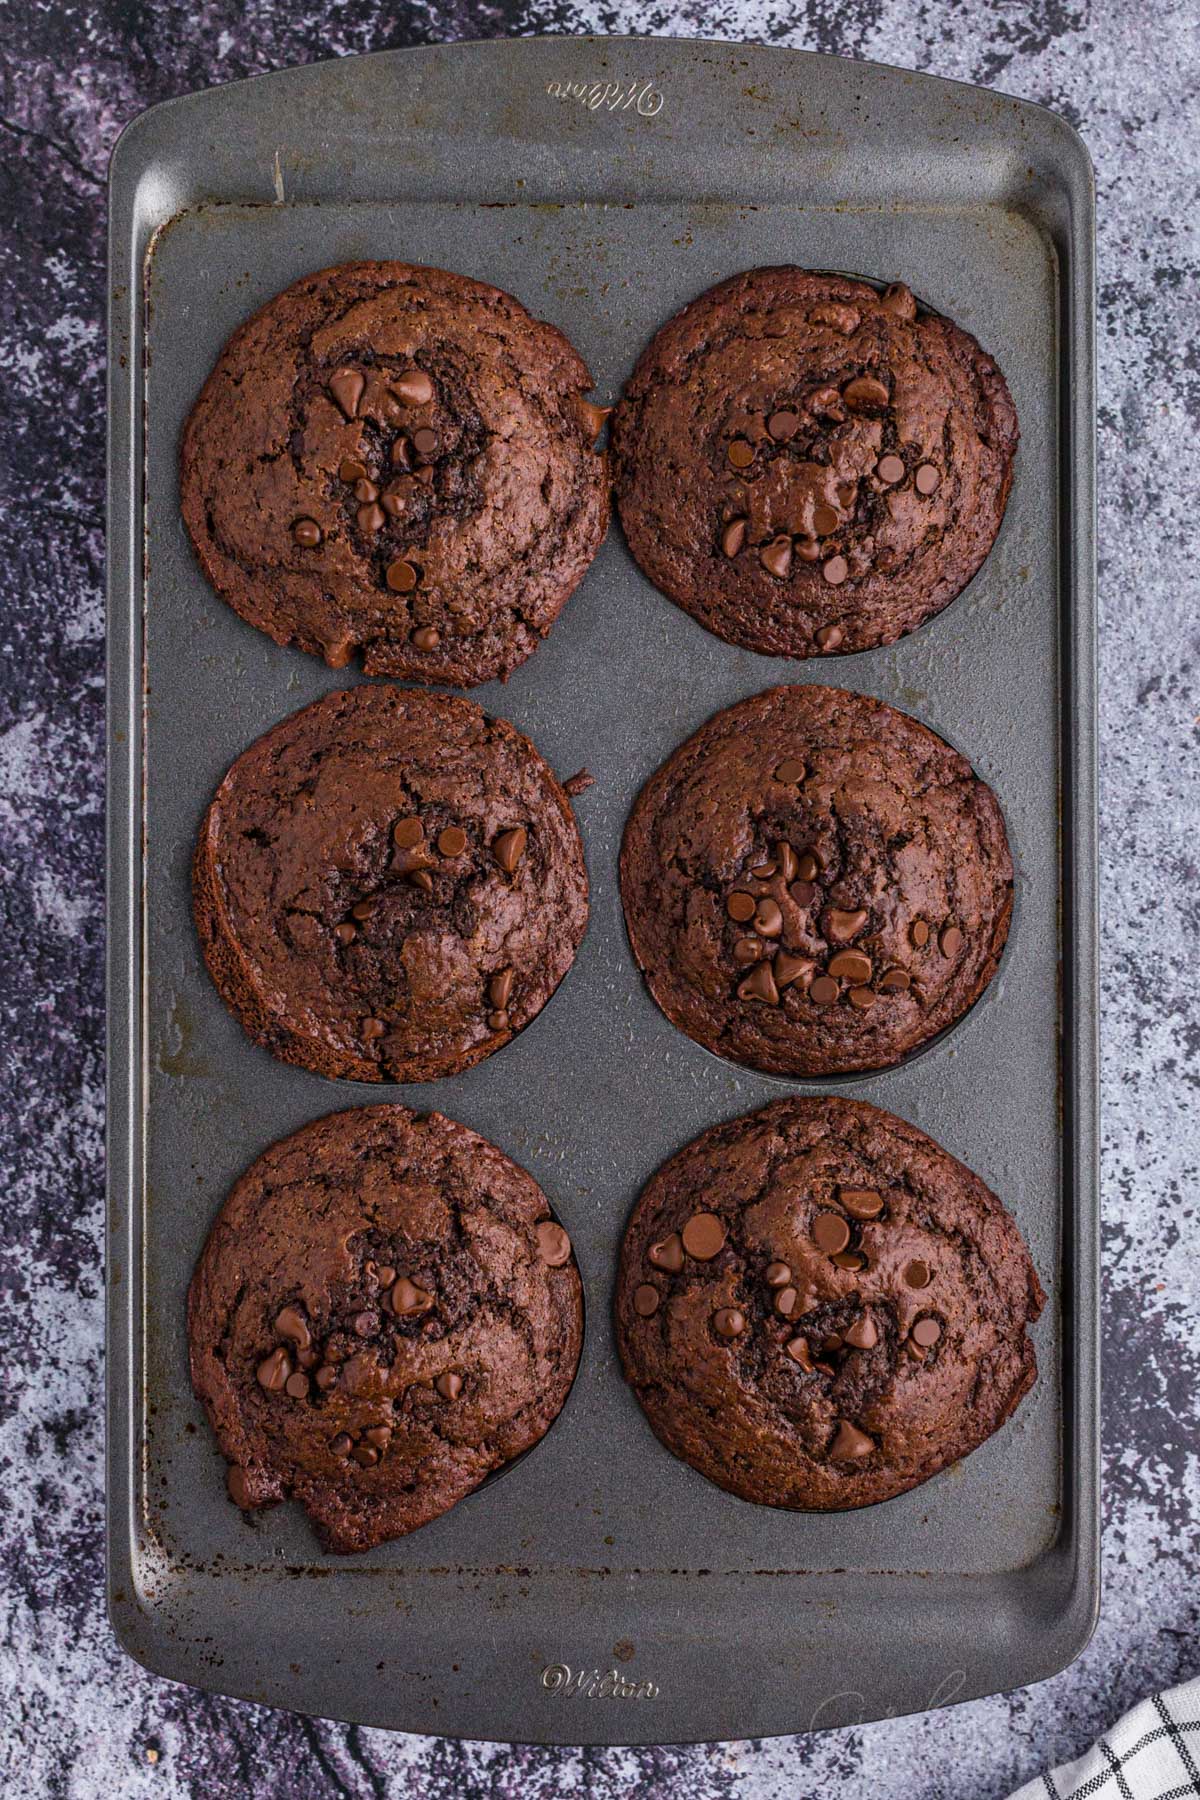 Overhead view of baked double chocolate muffins in a muffin pan.